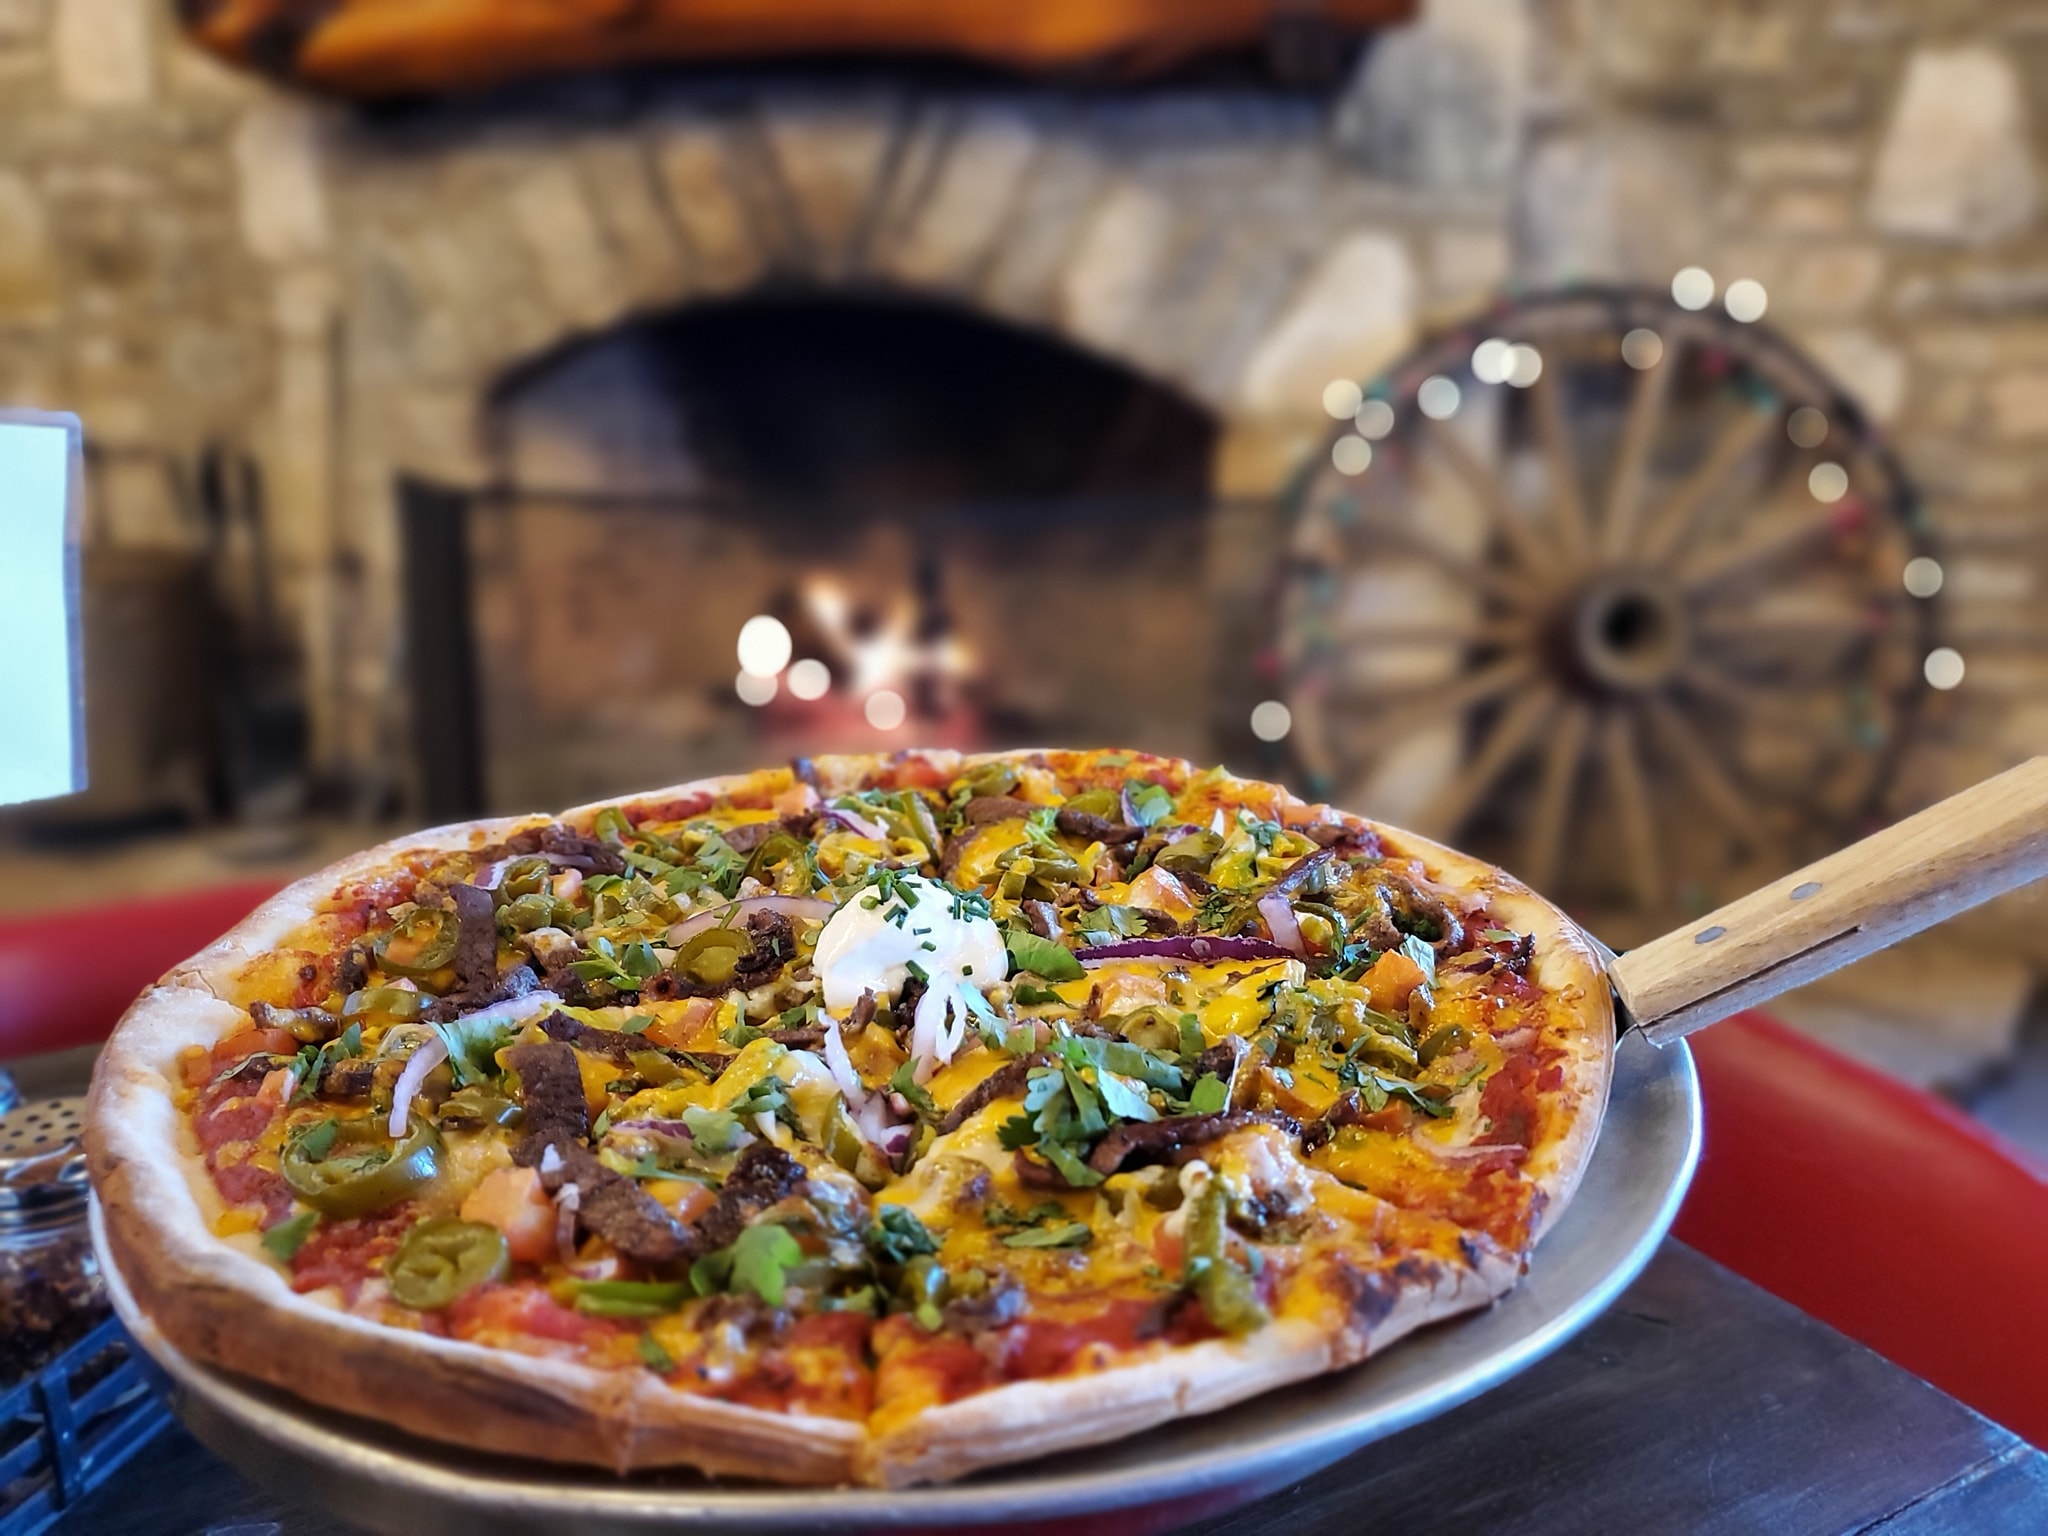 Pizza on a metal pan in front of a stone fireplace